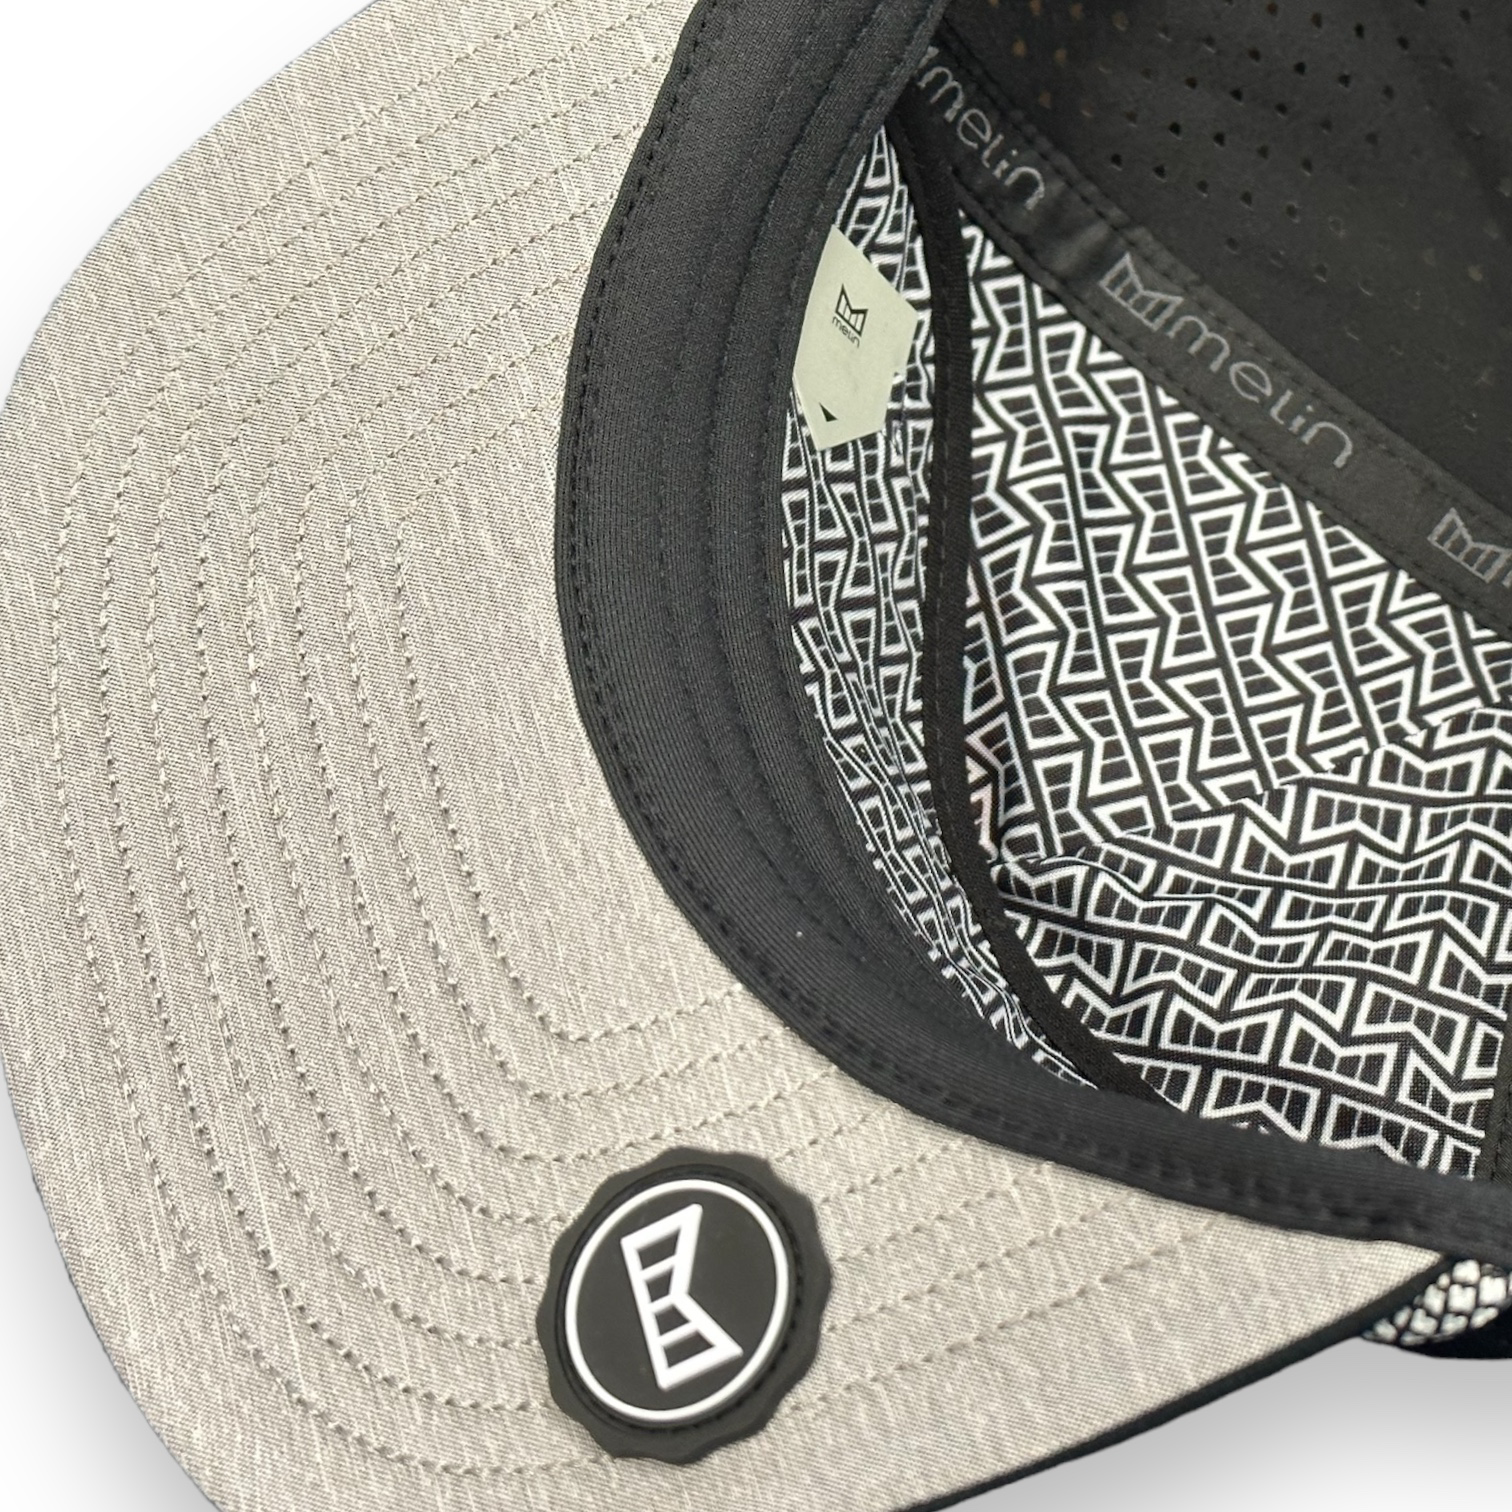 Inside view of snapback Melix x Snow Summit collab hat